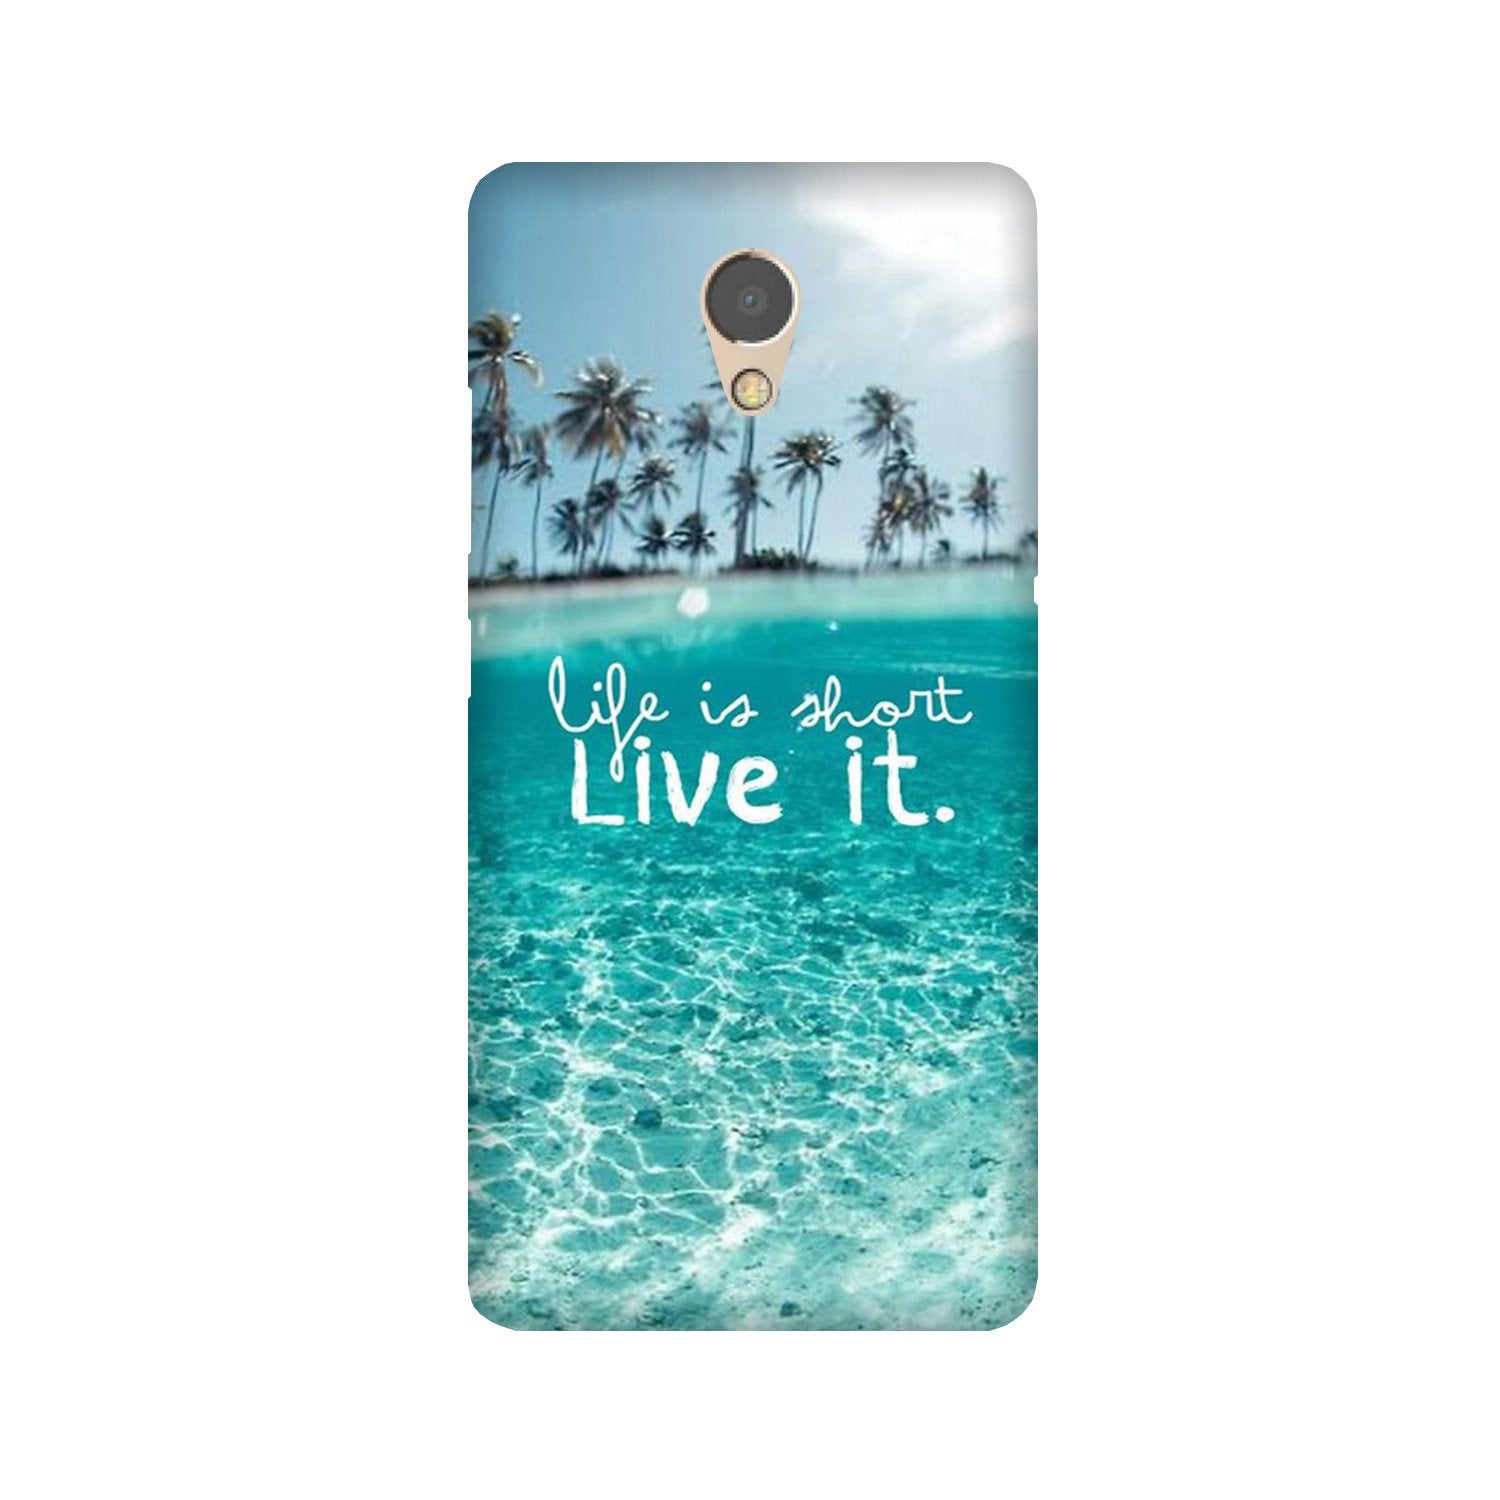 Life is short live it Case for Lenovo P2